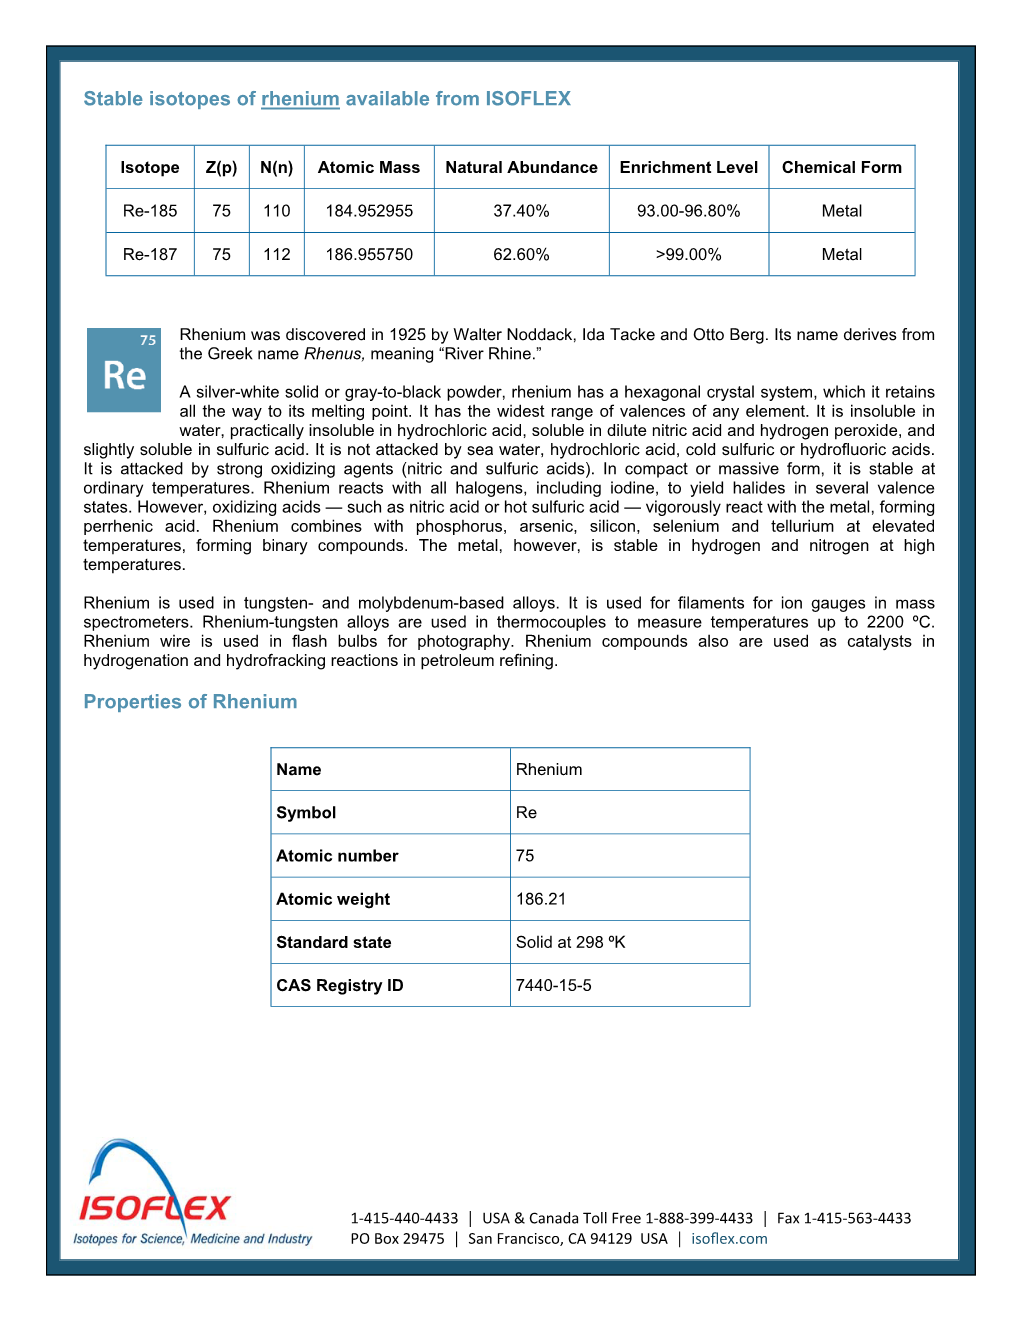 Stable Isotopes of Rhenium Available from ISOFLEX